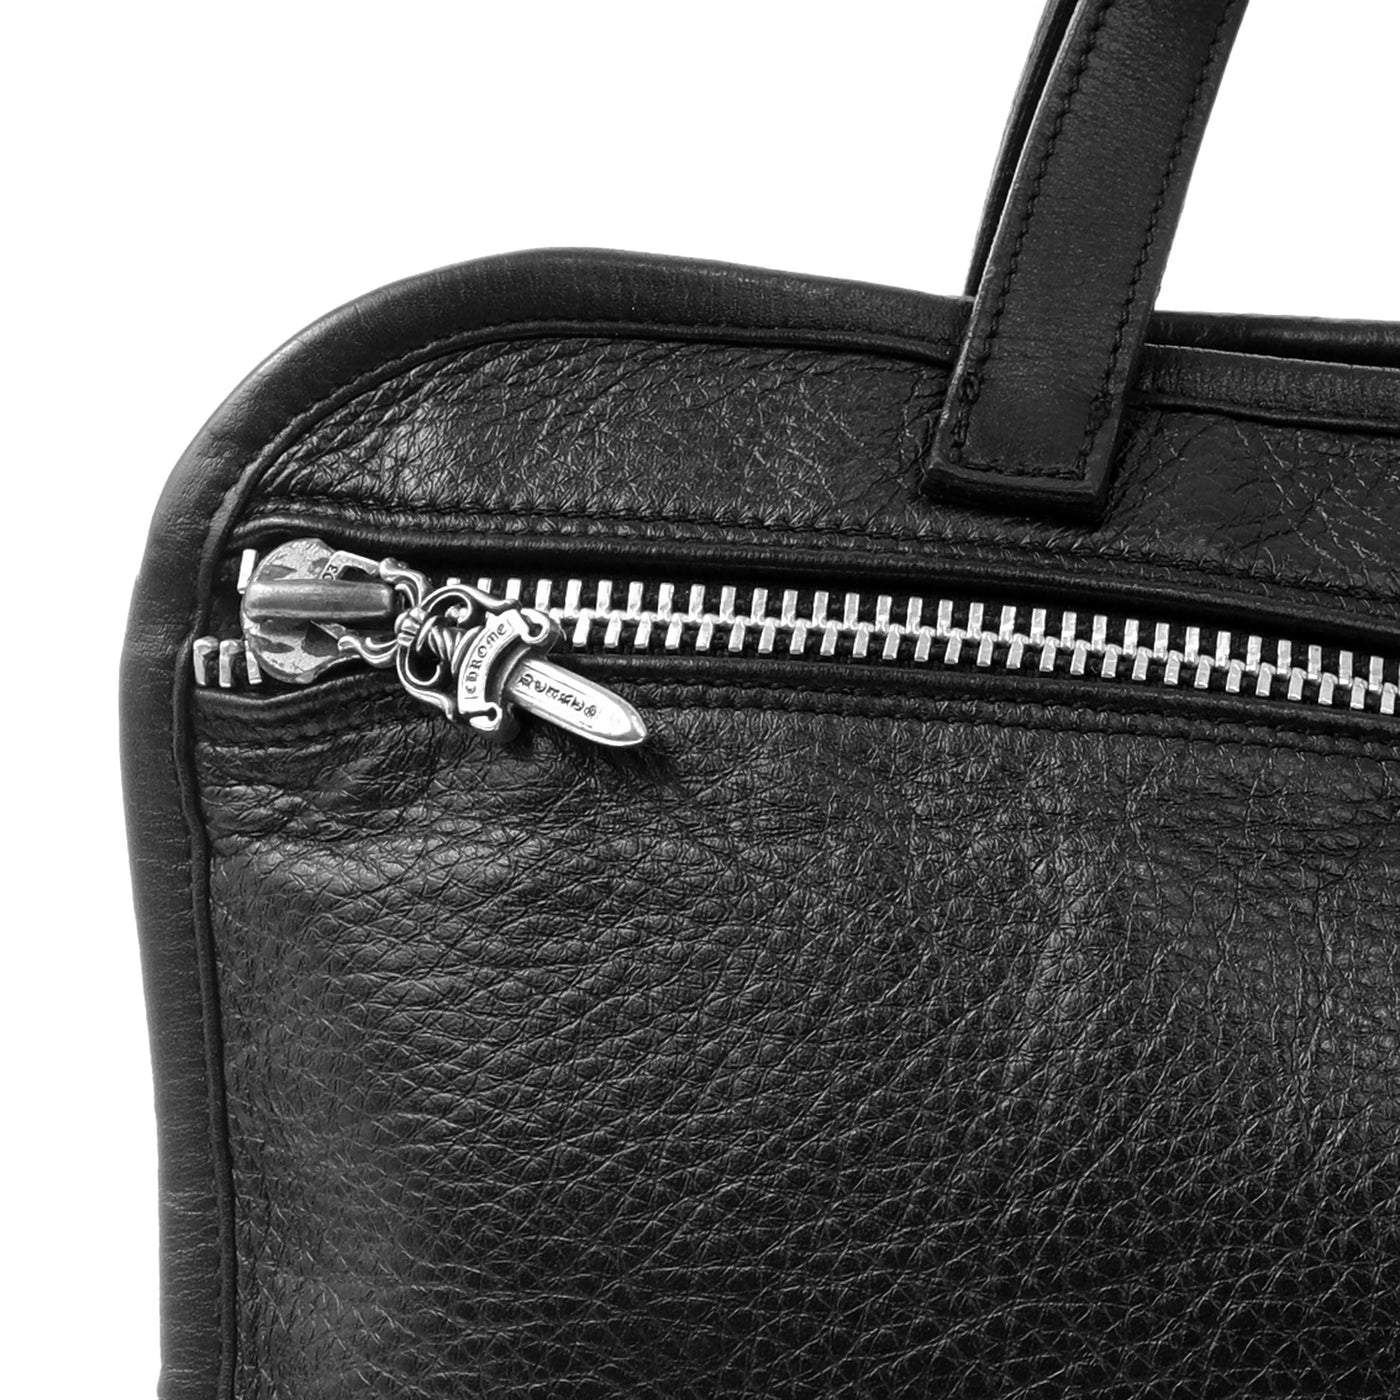 Chrome Hearts Black Small Briefcase with Cross Hardware